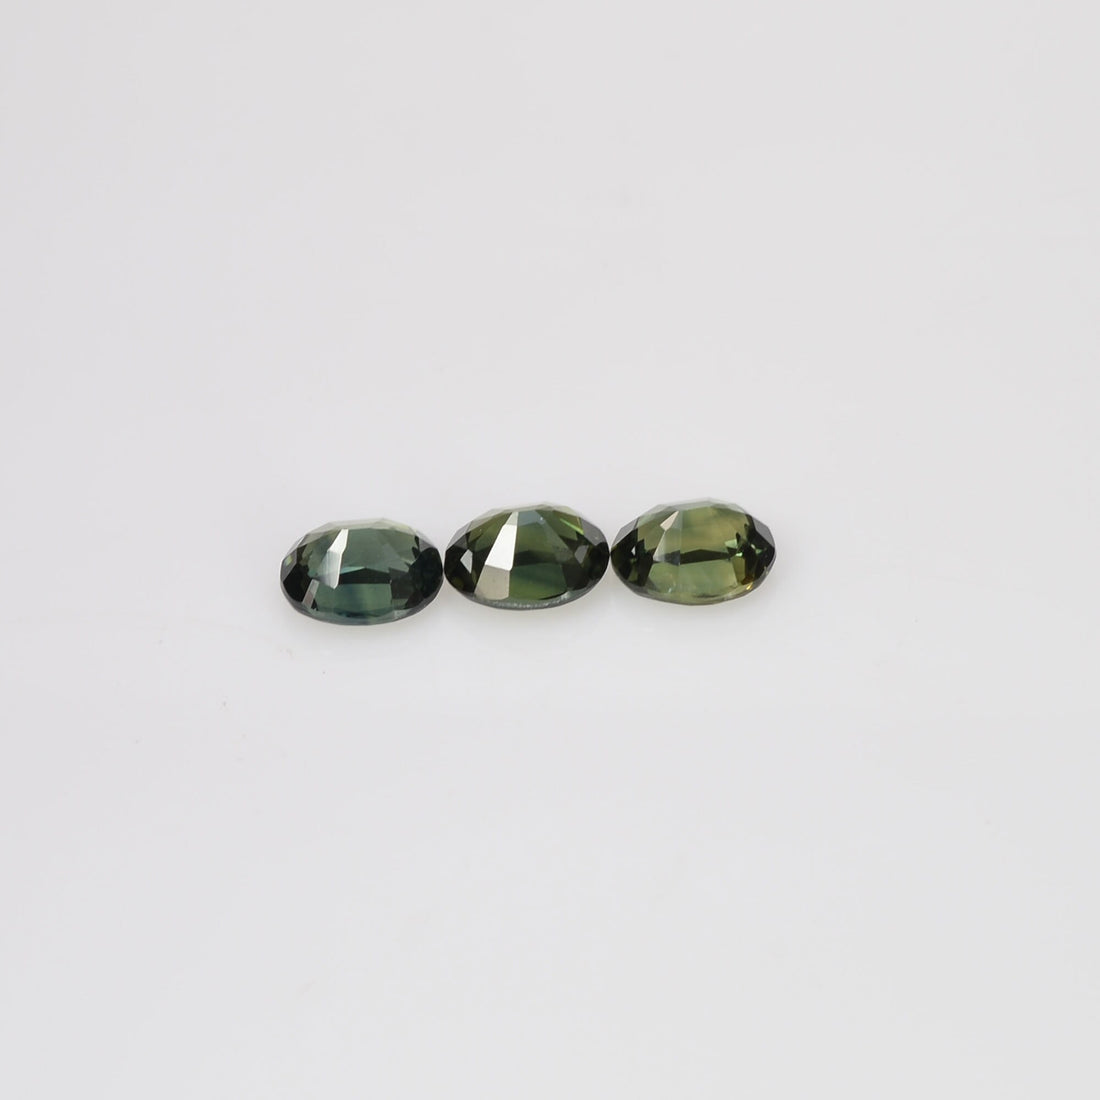 5x4 mm Natural Calibrated Teal Green Sapphire Loose Gemstone Oval Cut